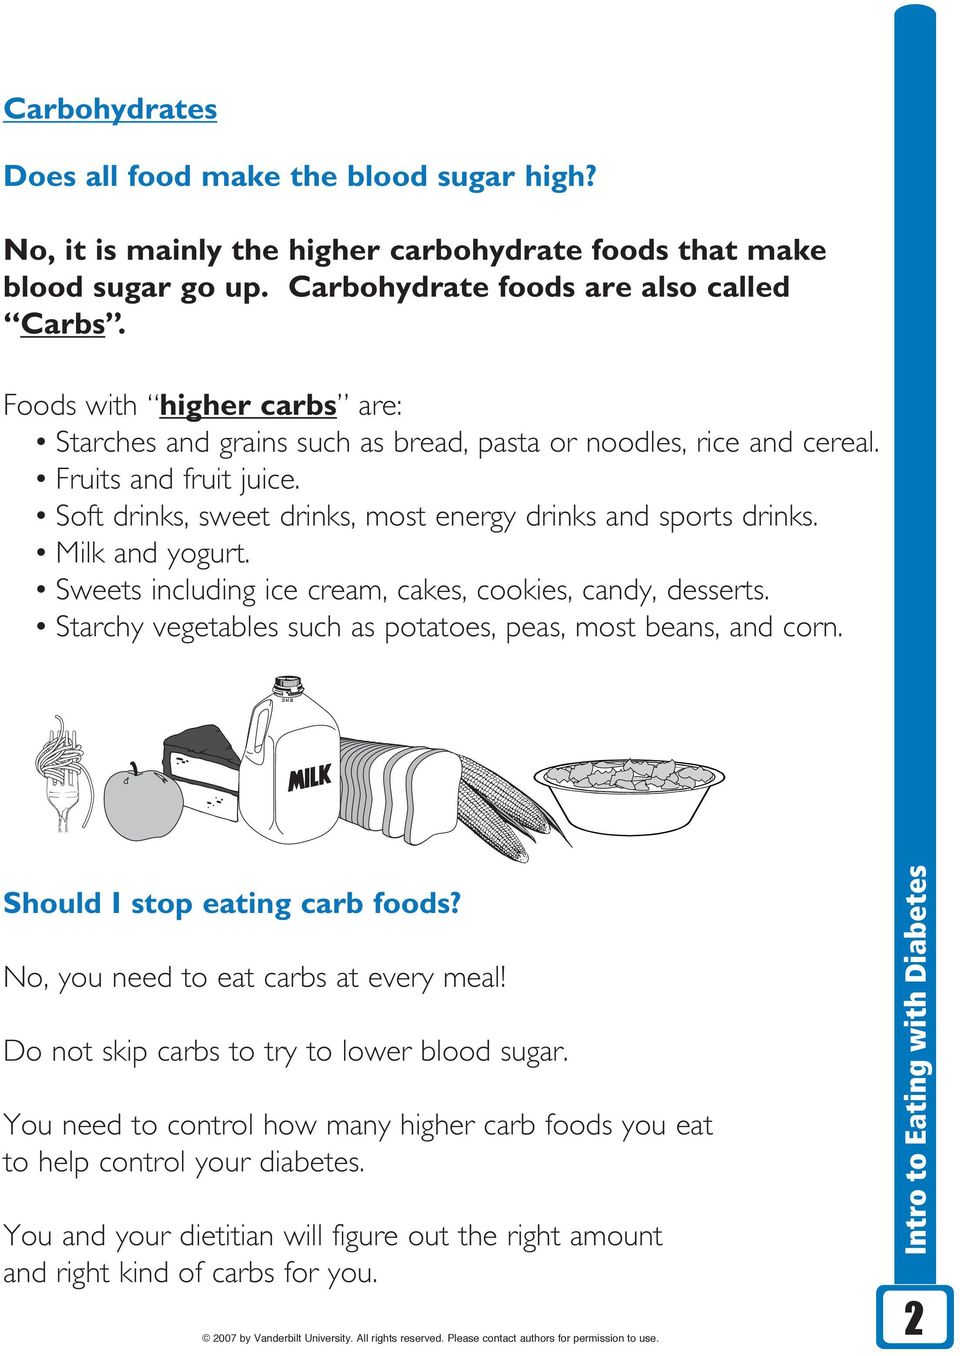 Milk and yogurt. Sweets including ice cream, cakes, cookies, candy, desserts. Starchy vegetables such as potatoes, peas, most beans, and corn. Should I stop eating carb foods?